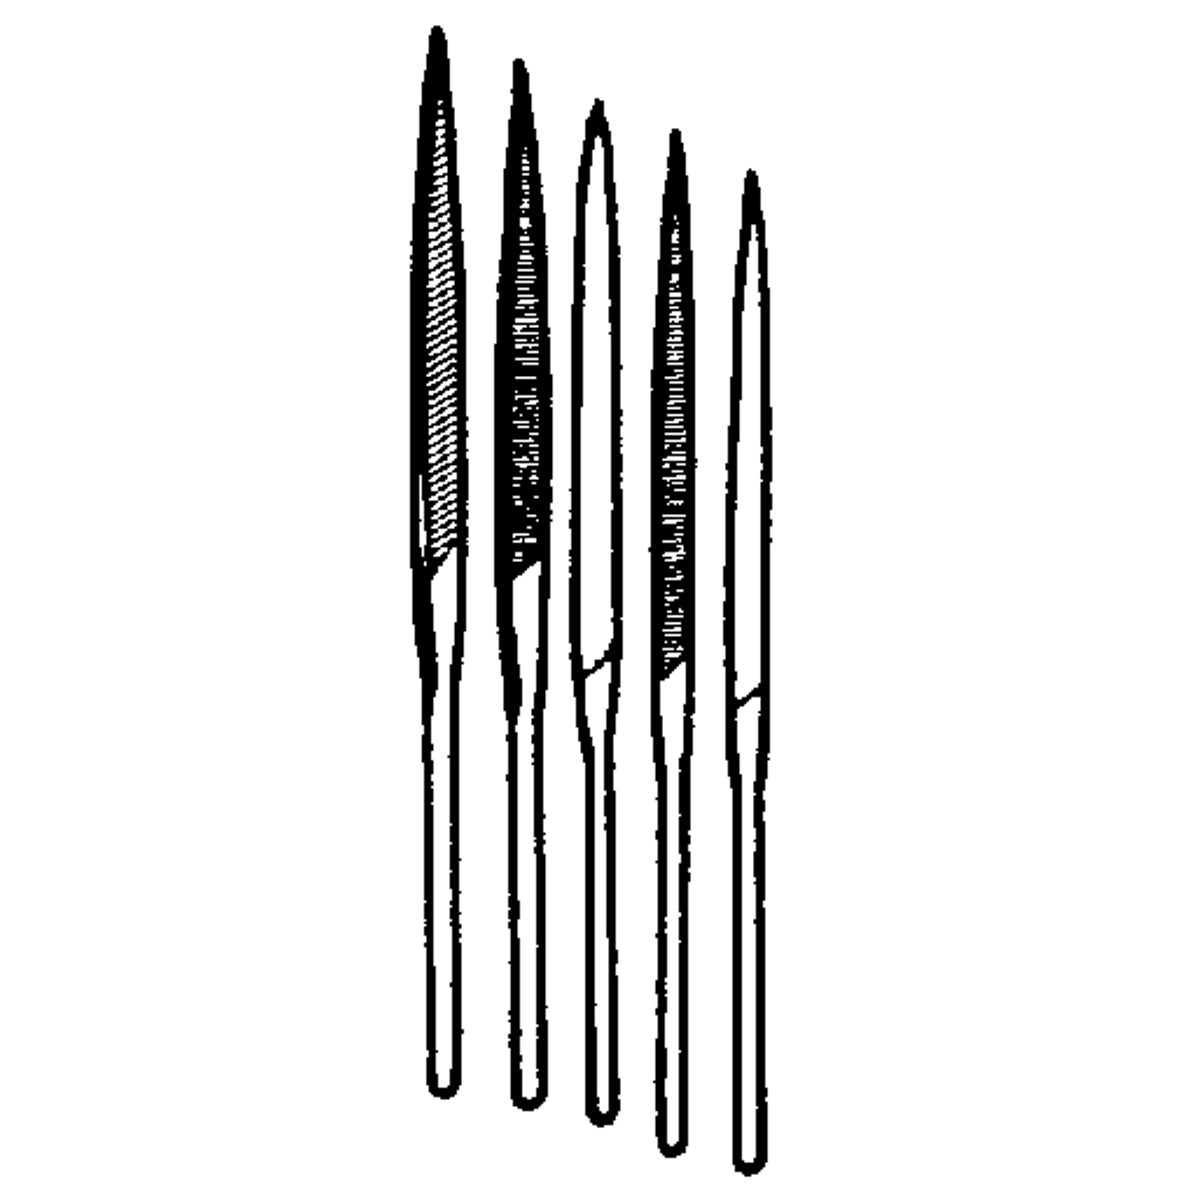 Item 364983, The Great Neck 6-Piece Needle File Set features six swiss pattern files 